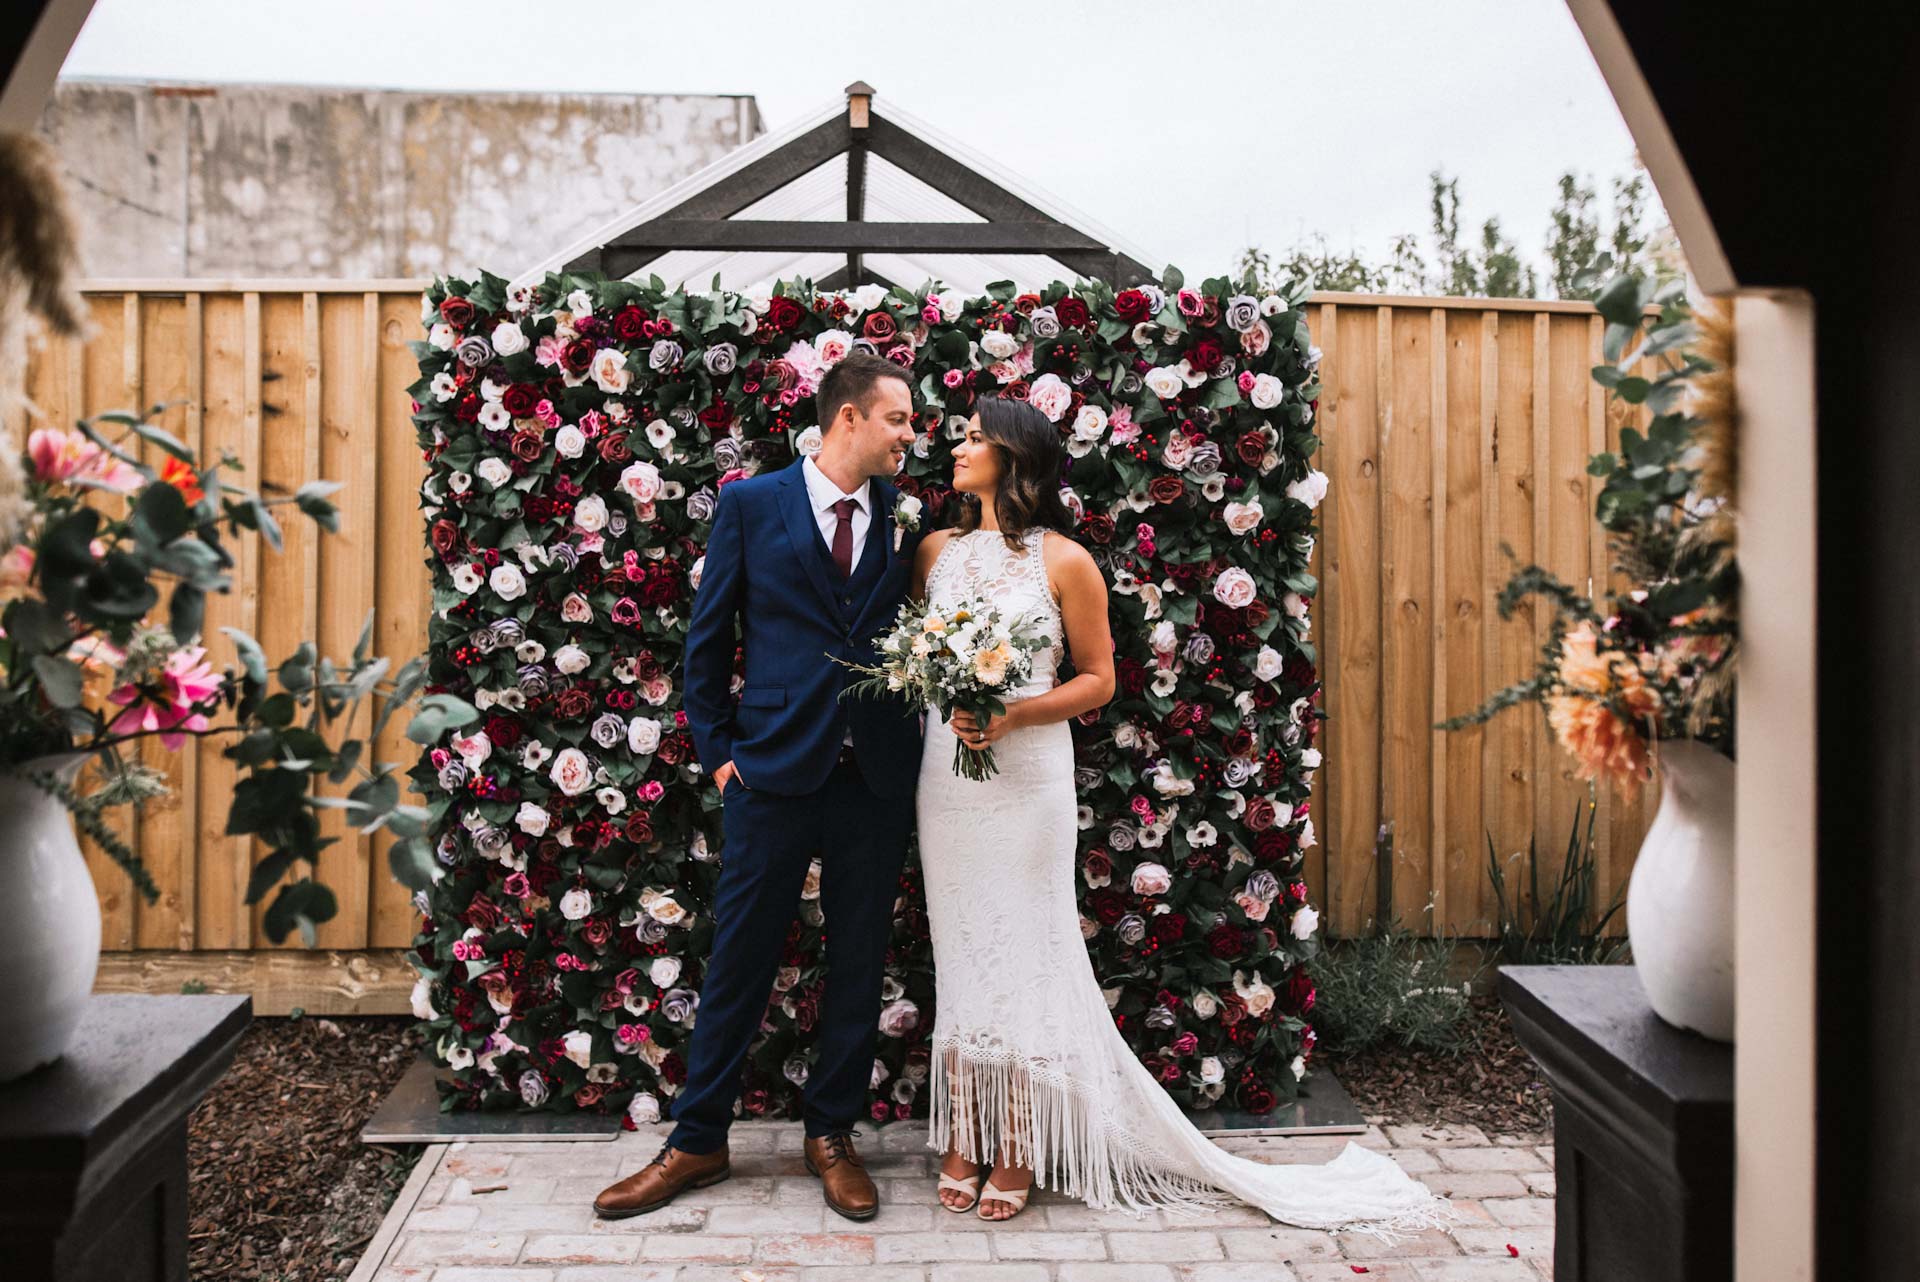 Wedding Planning Post Pandemic - Covid 19 and your dream wedding.